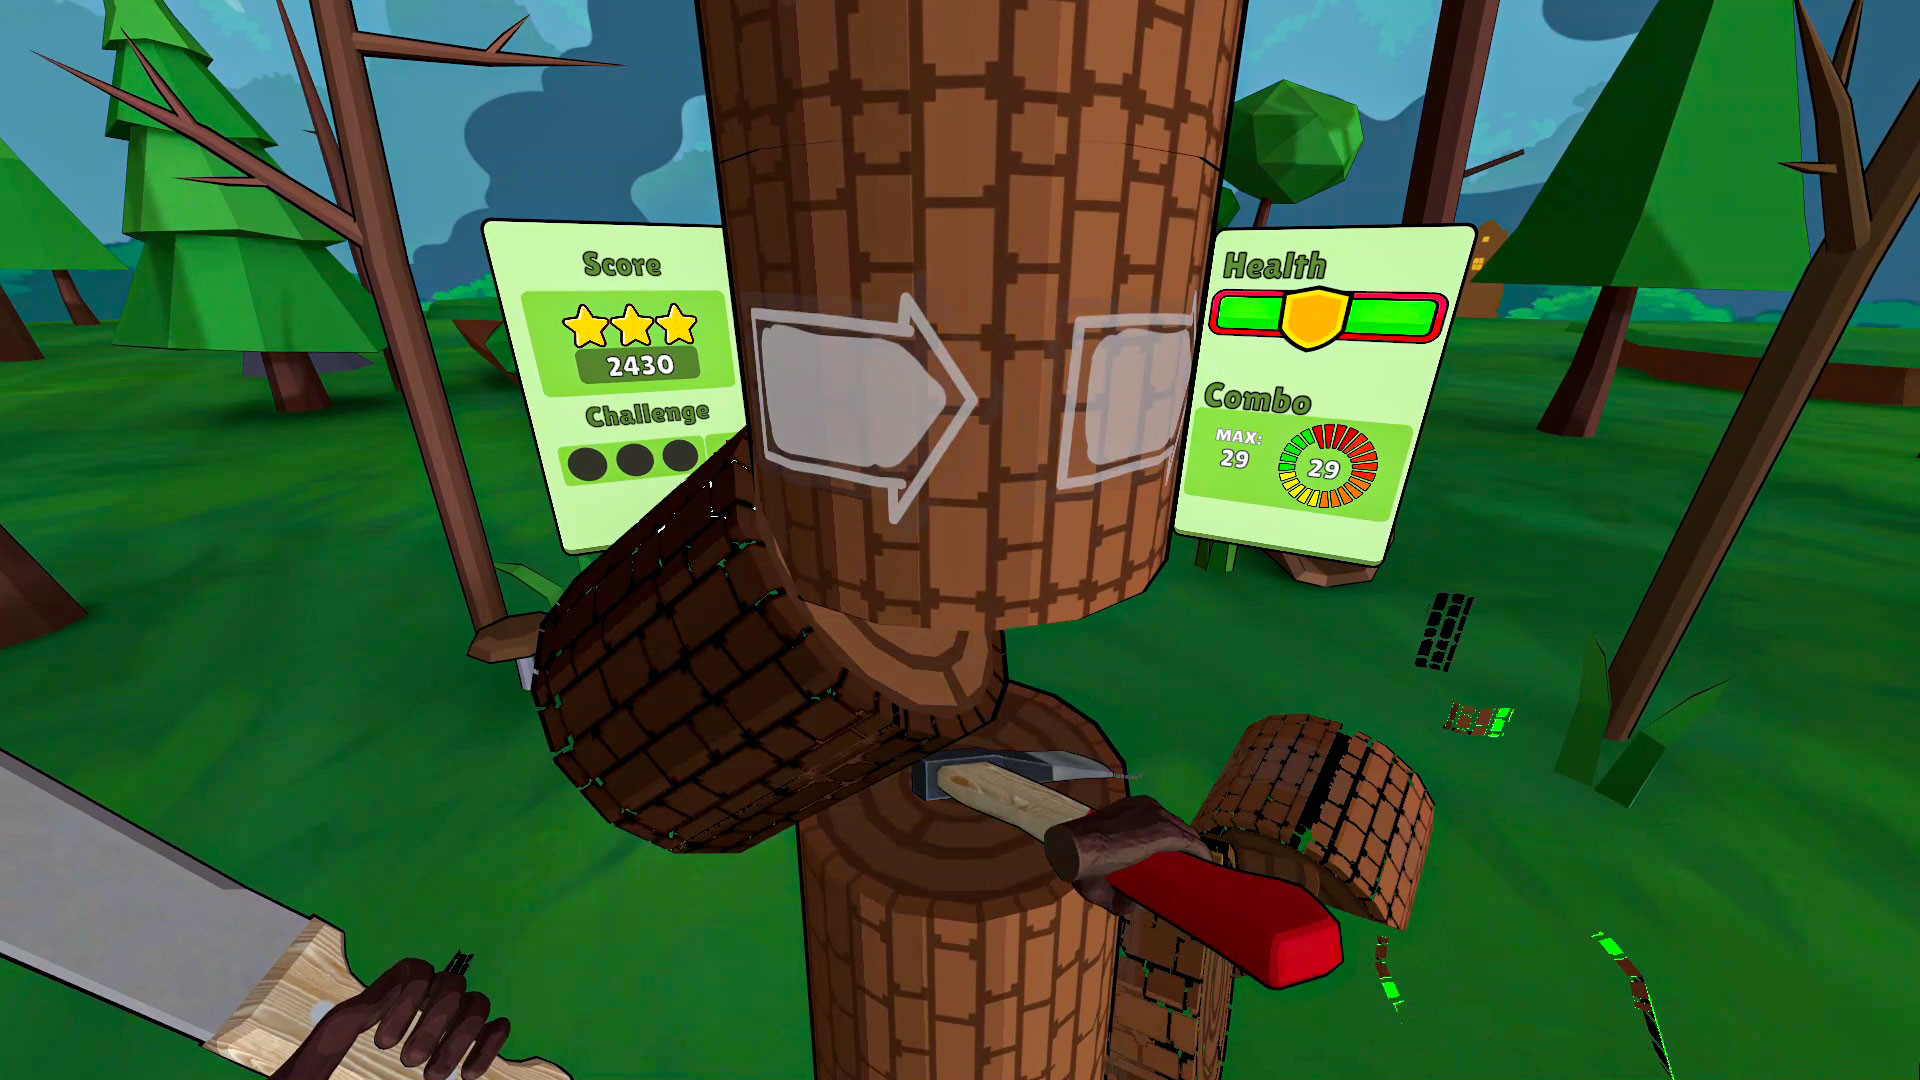 Timberman VR - grab an axe, chop trees, beat records! Free Download